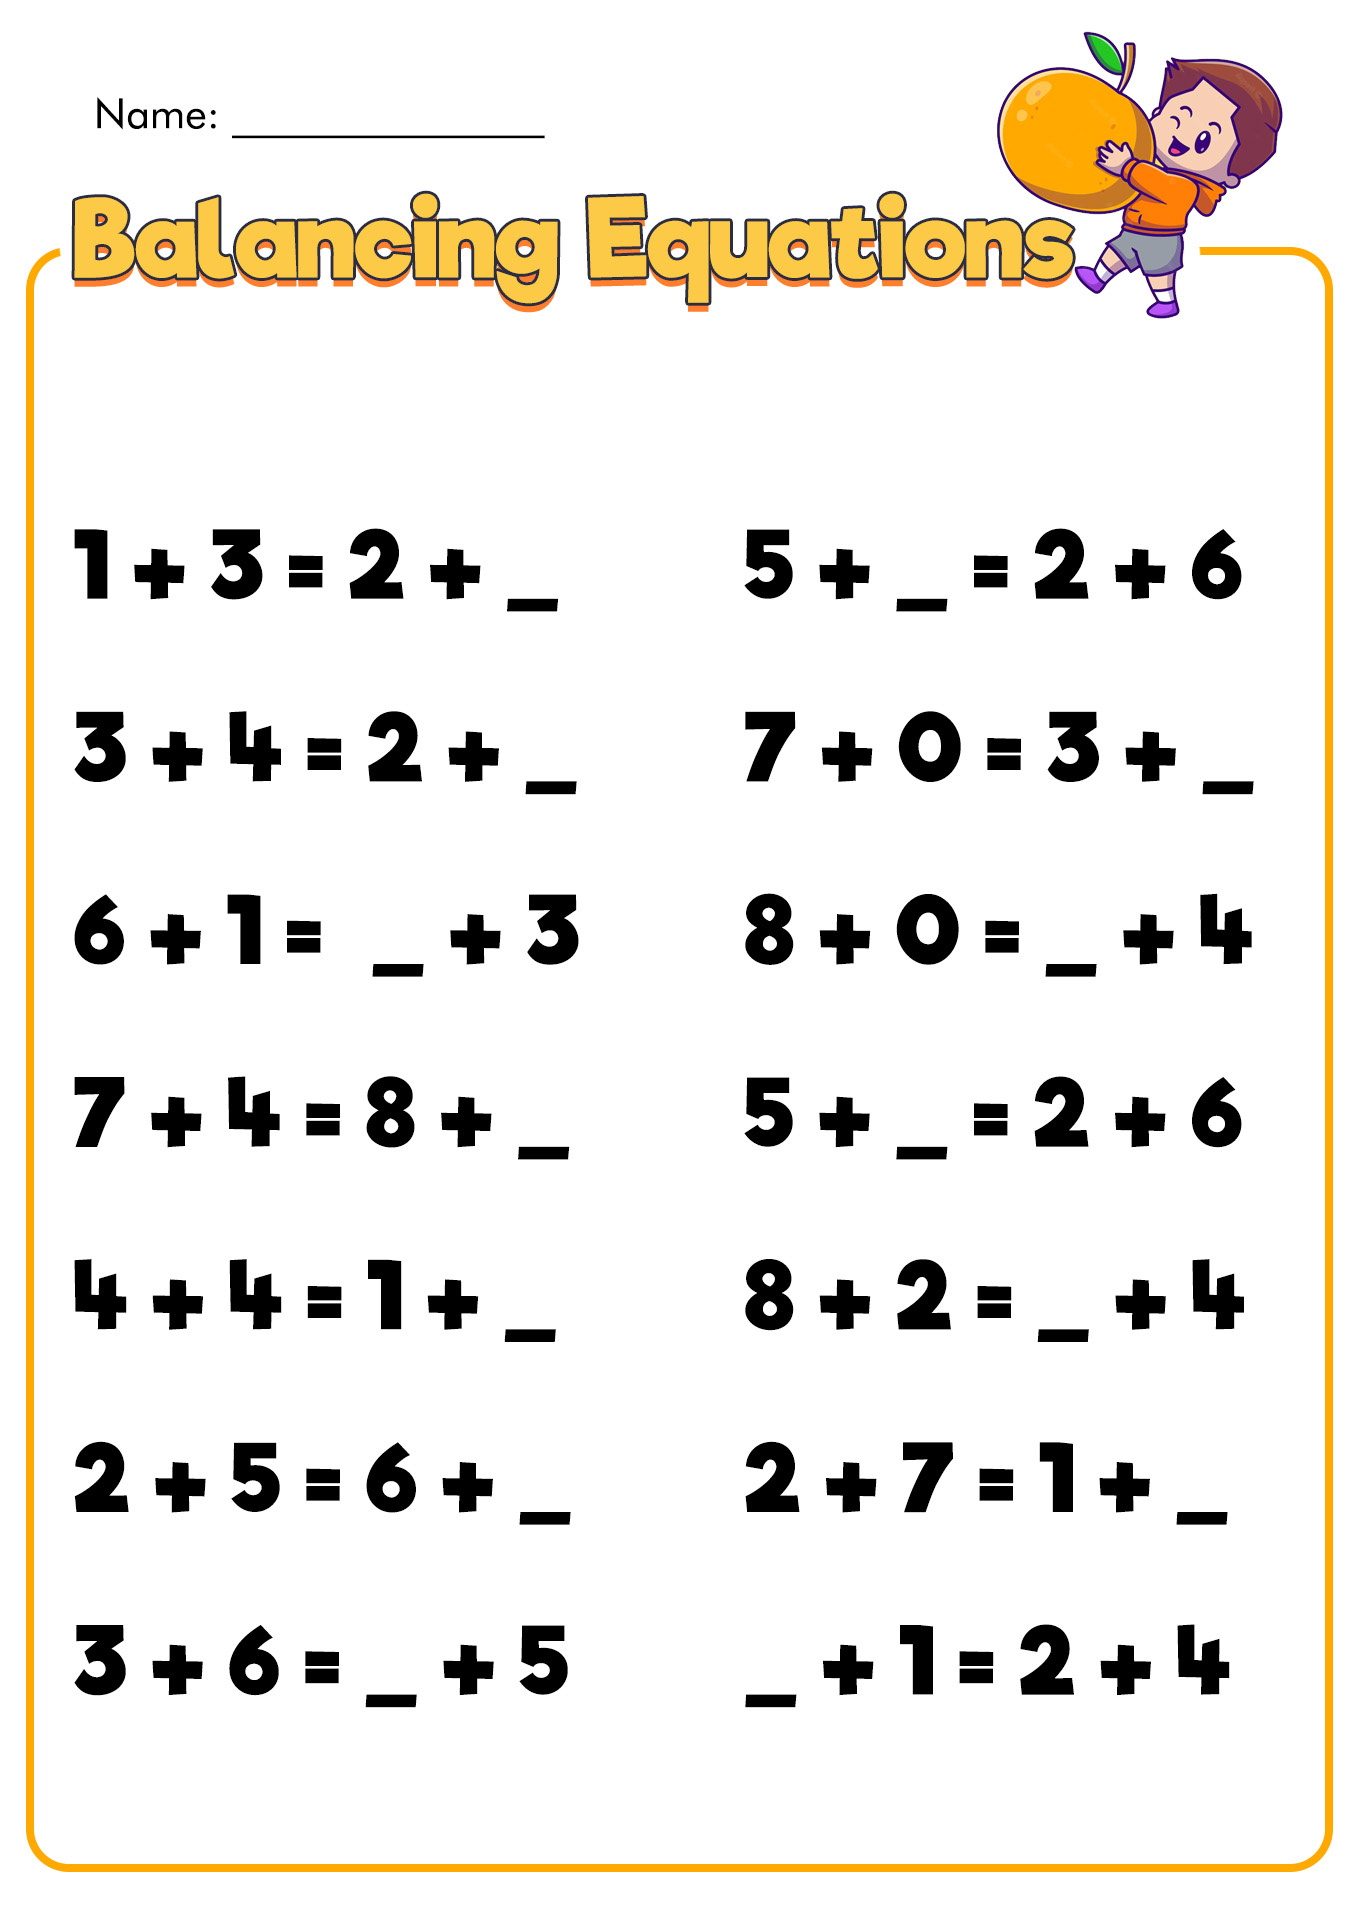 3-variable-system-of-equations-word-problems-worksheet-answers-kidsworksheetfun